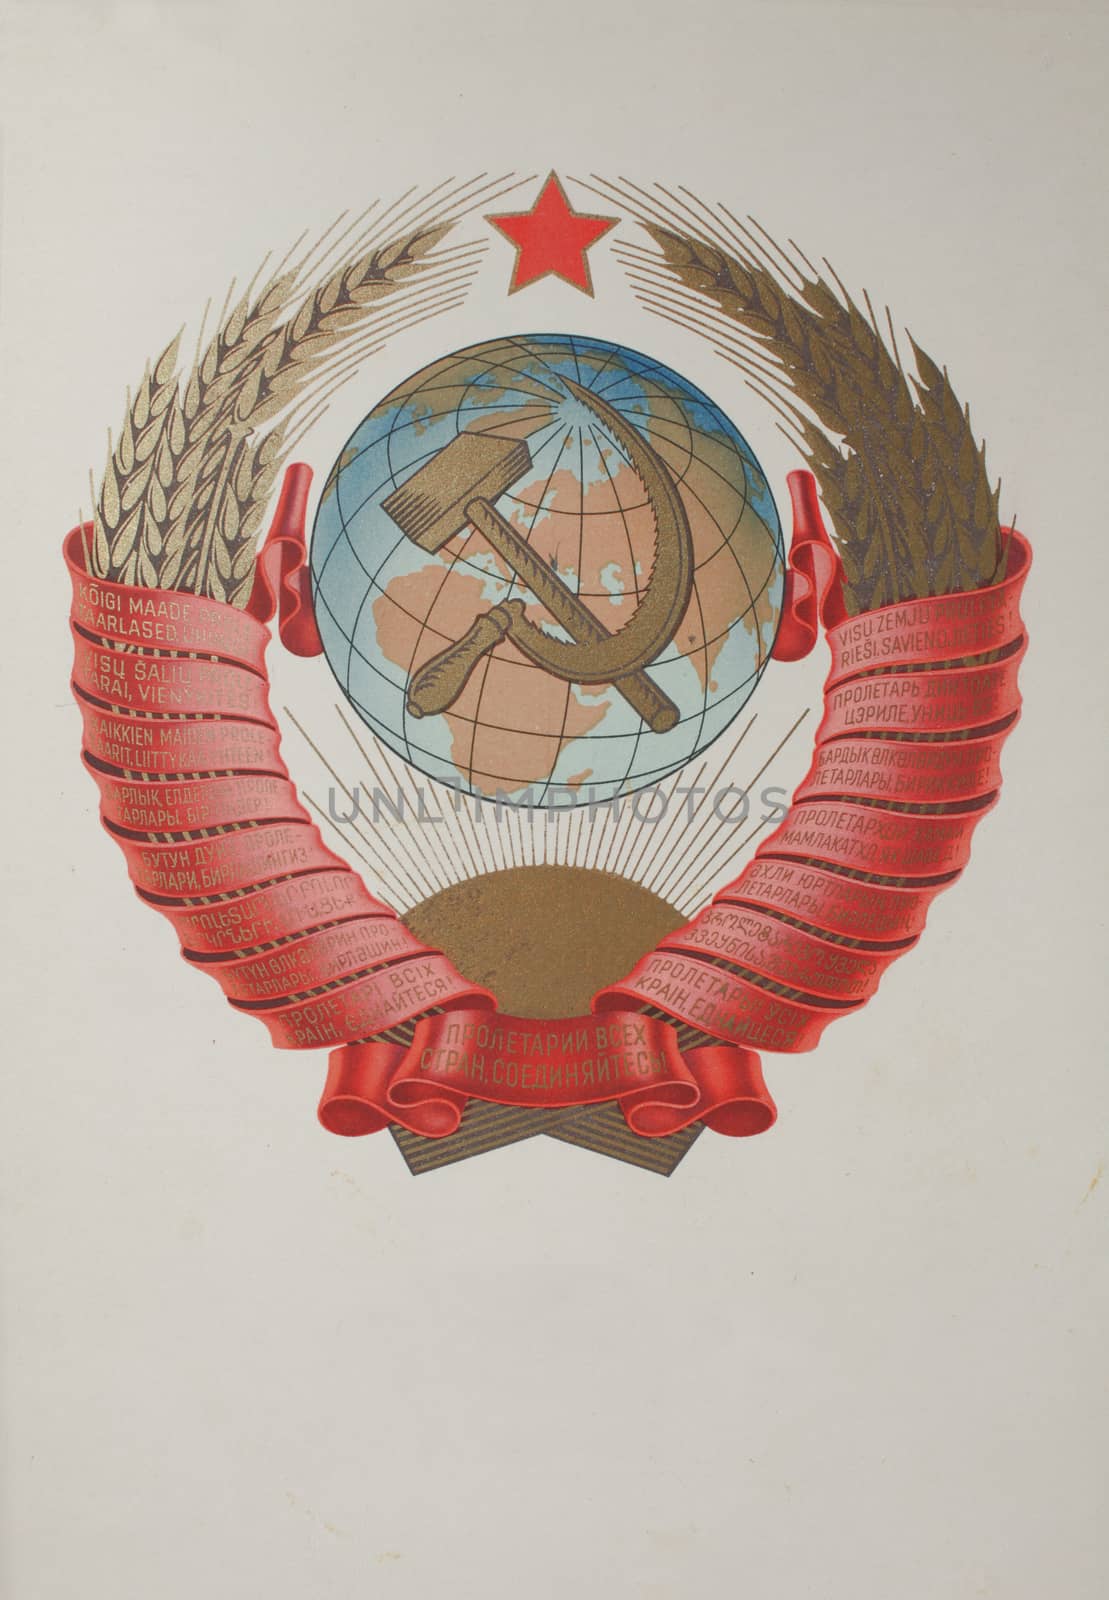 Coat of arms of the Soviet Union drawing